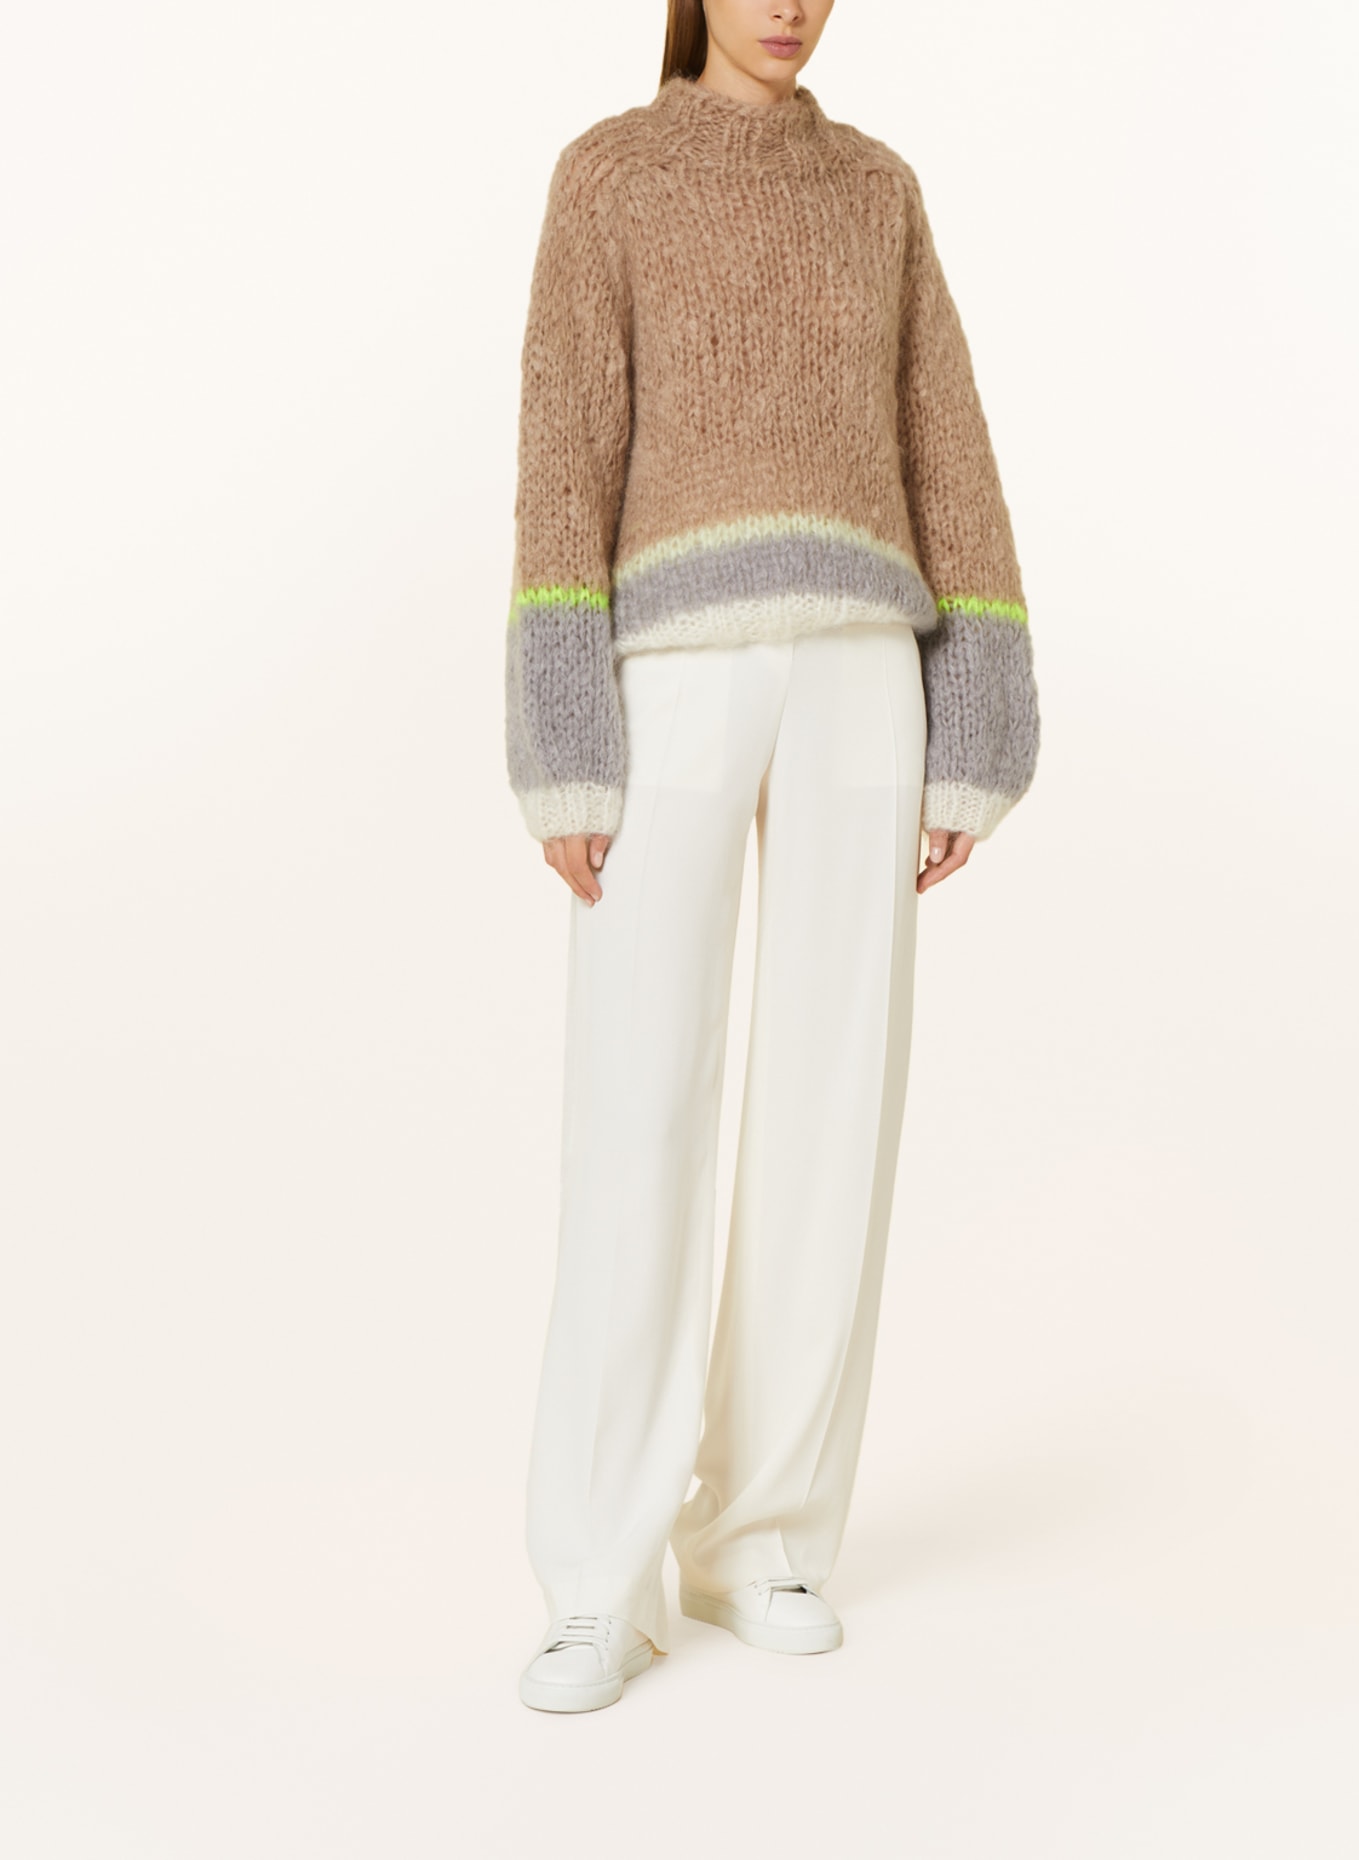 MAIAMI Mohair sweater, Color: BEIGE/ GRAY (Image 2)